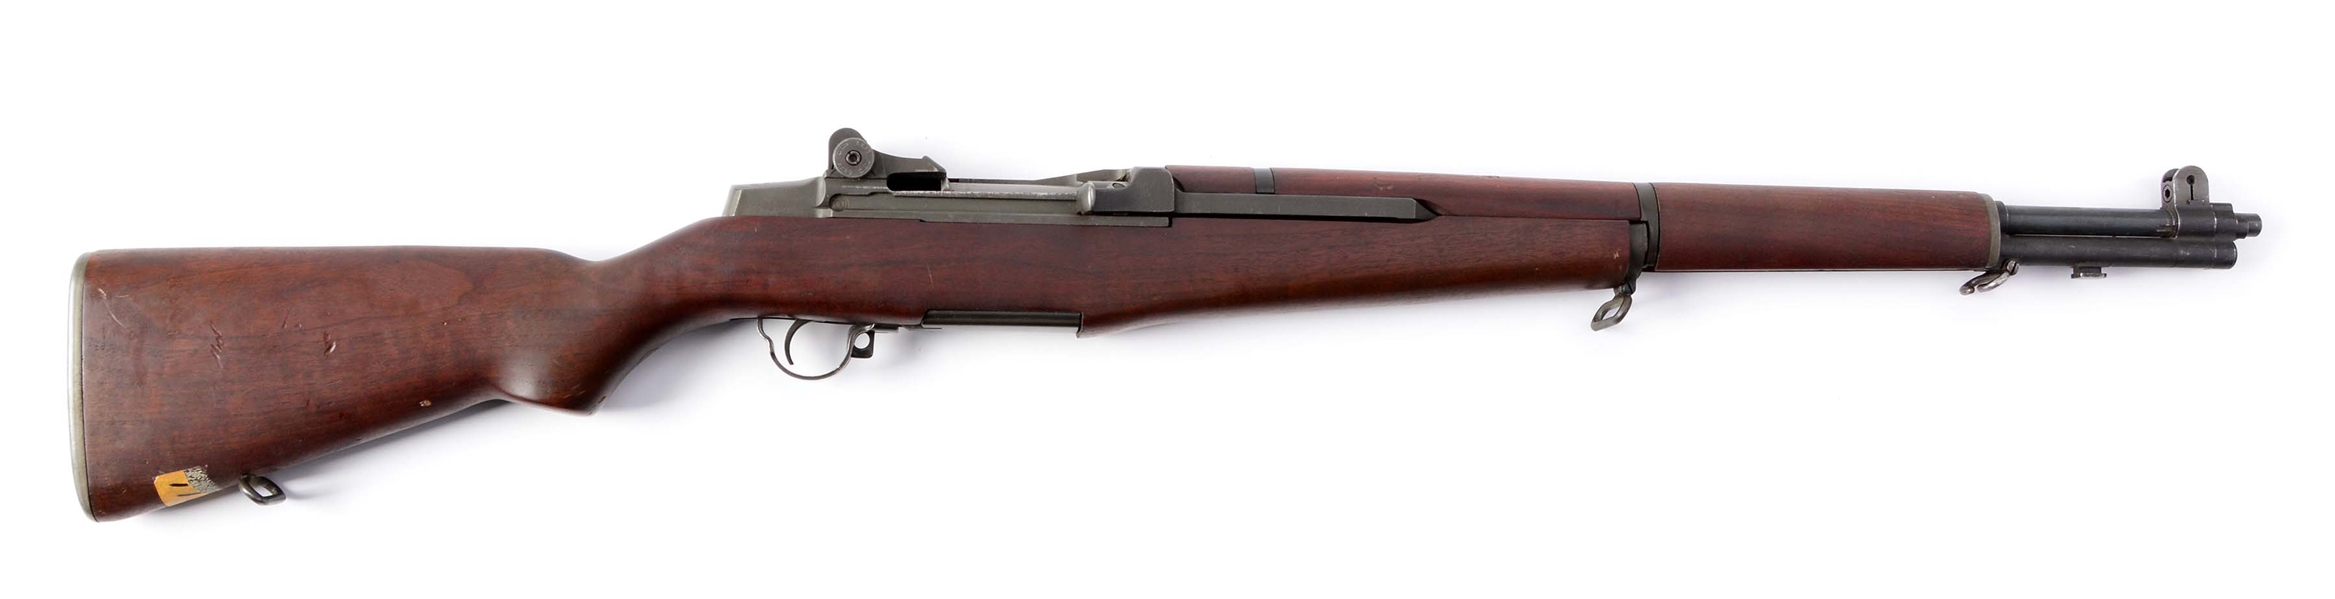 (C) OUTSTANDING AND POSSIBLY UNISSUED HARRINGTON AND RICHARDSON M1 GARAND RIFLE